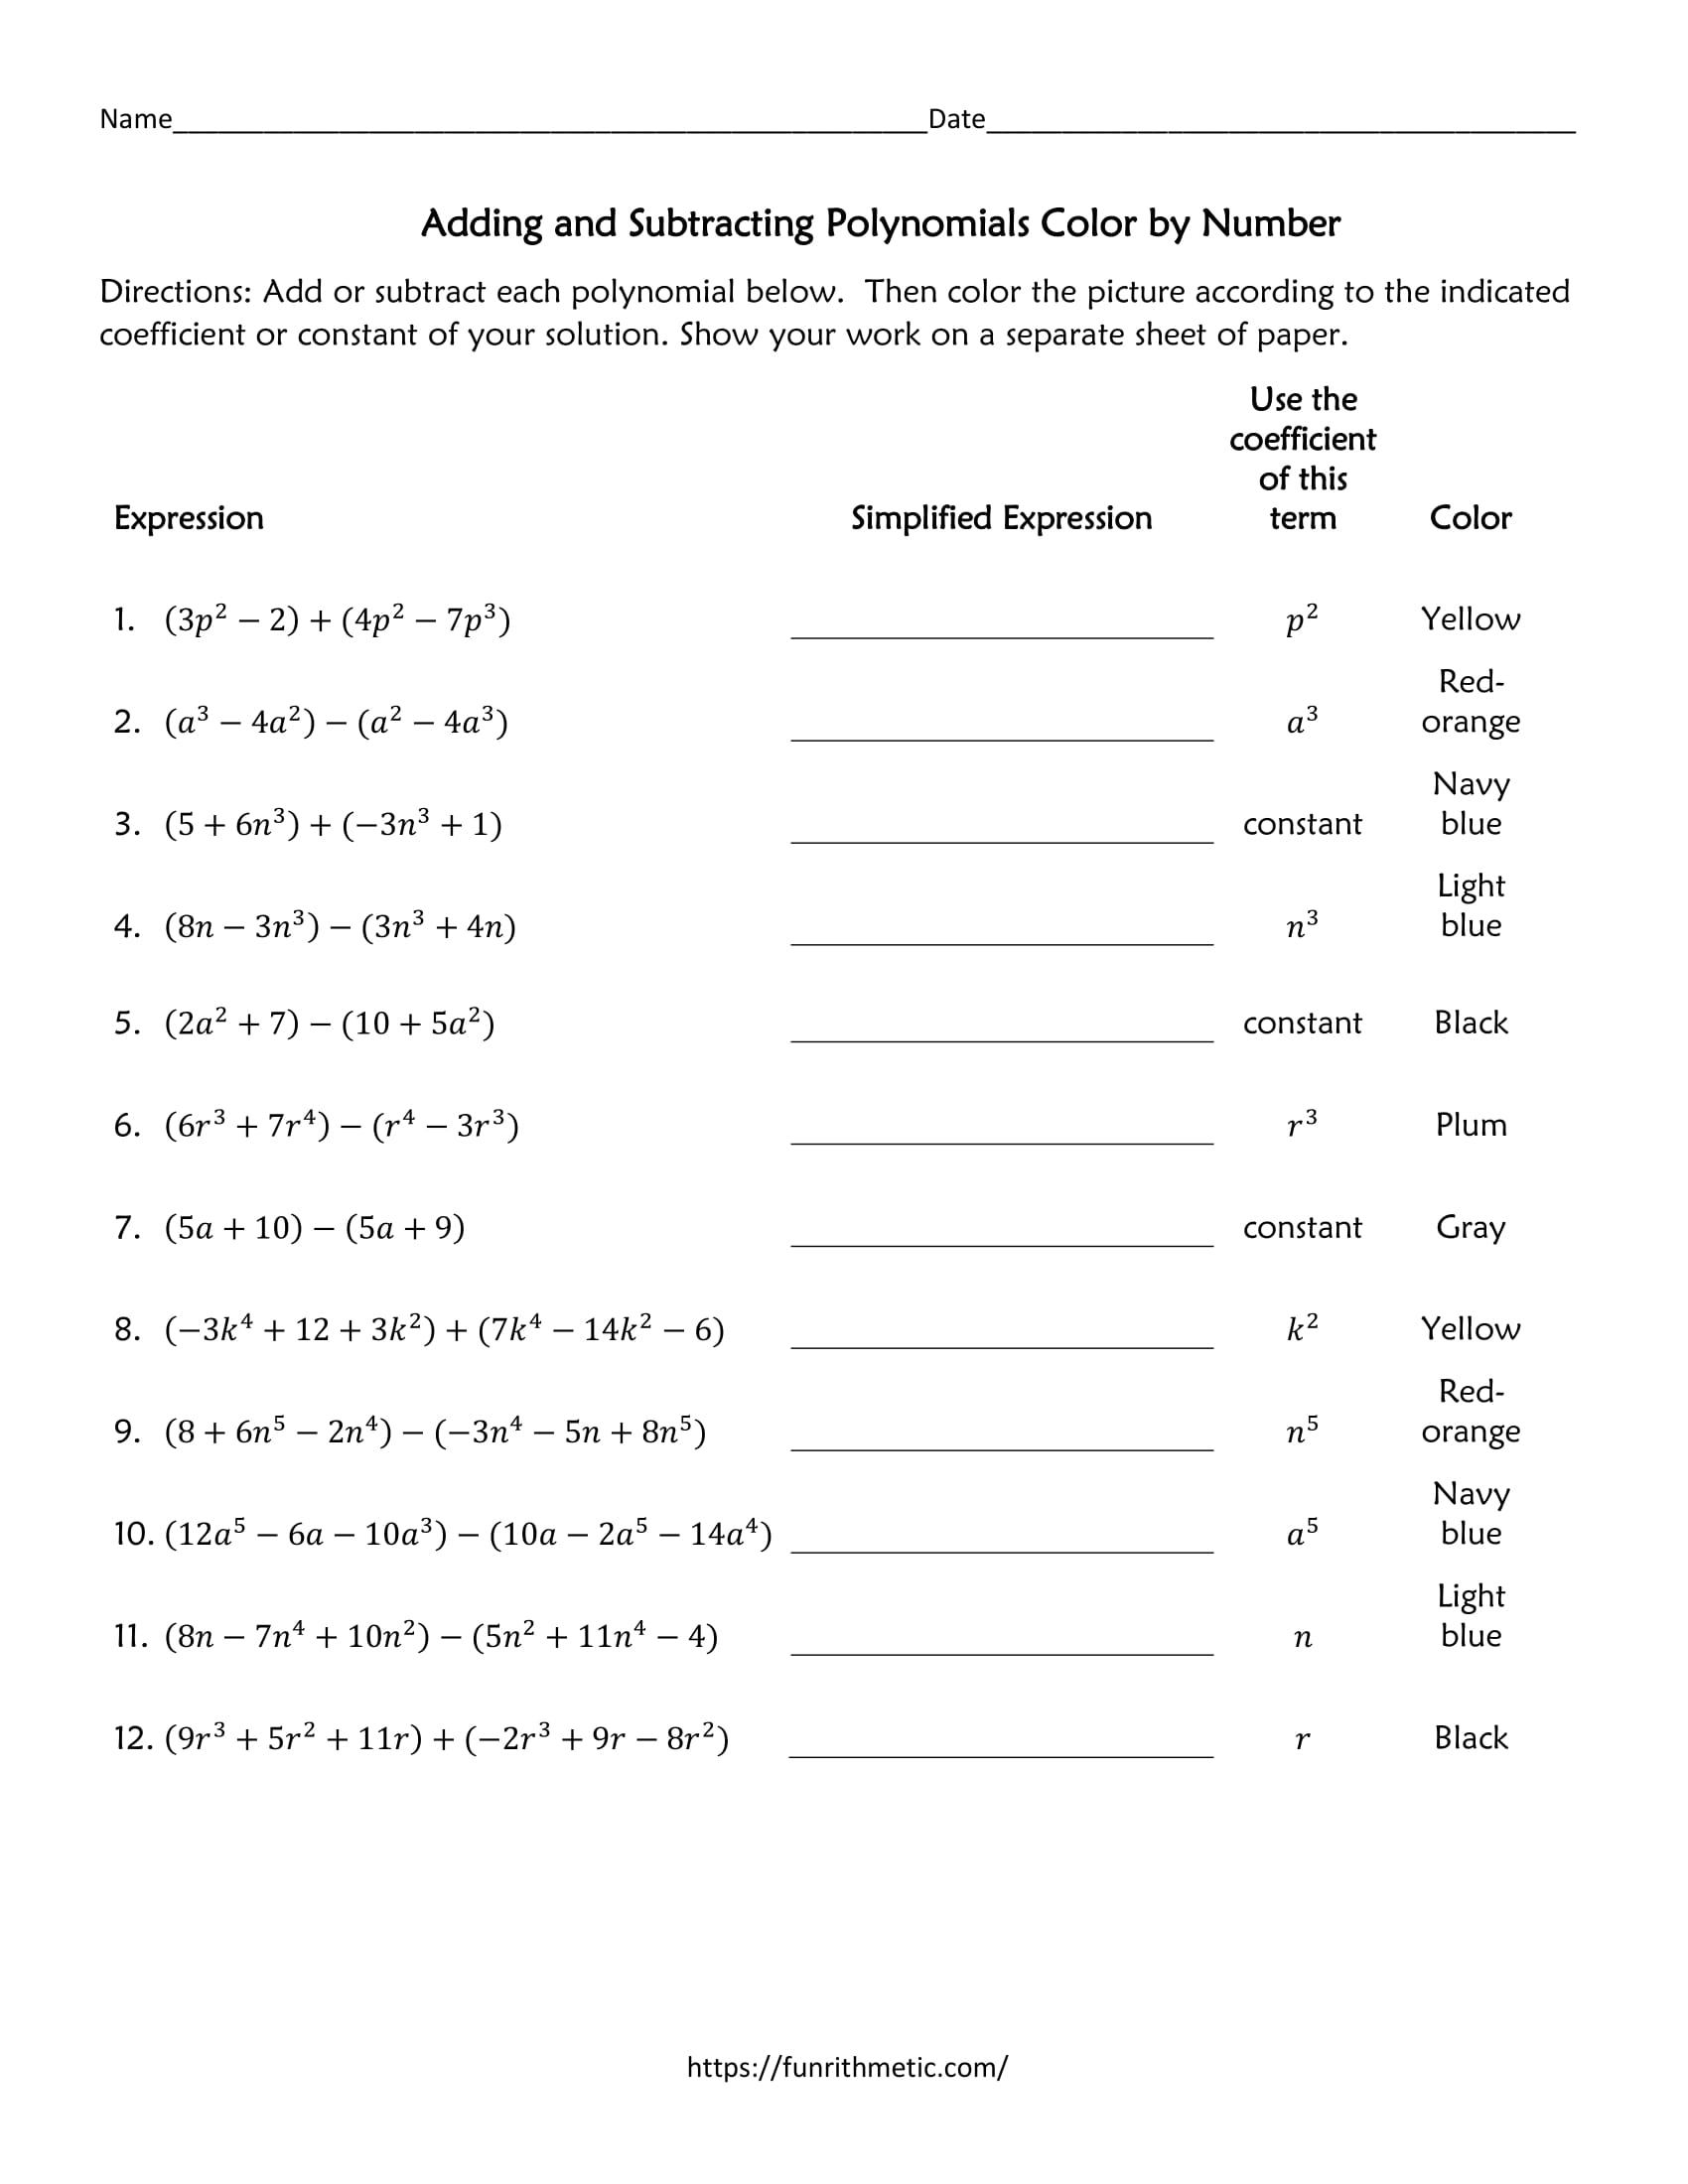 Adding and Subtracting Polynomials Color by Number Intended For Adding Subtracting Polynomials Worksheet